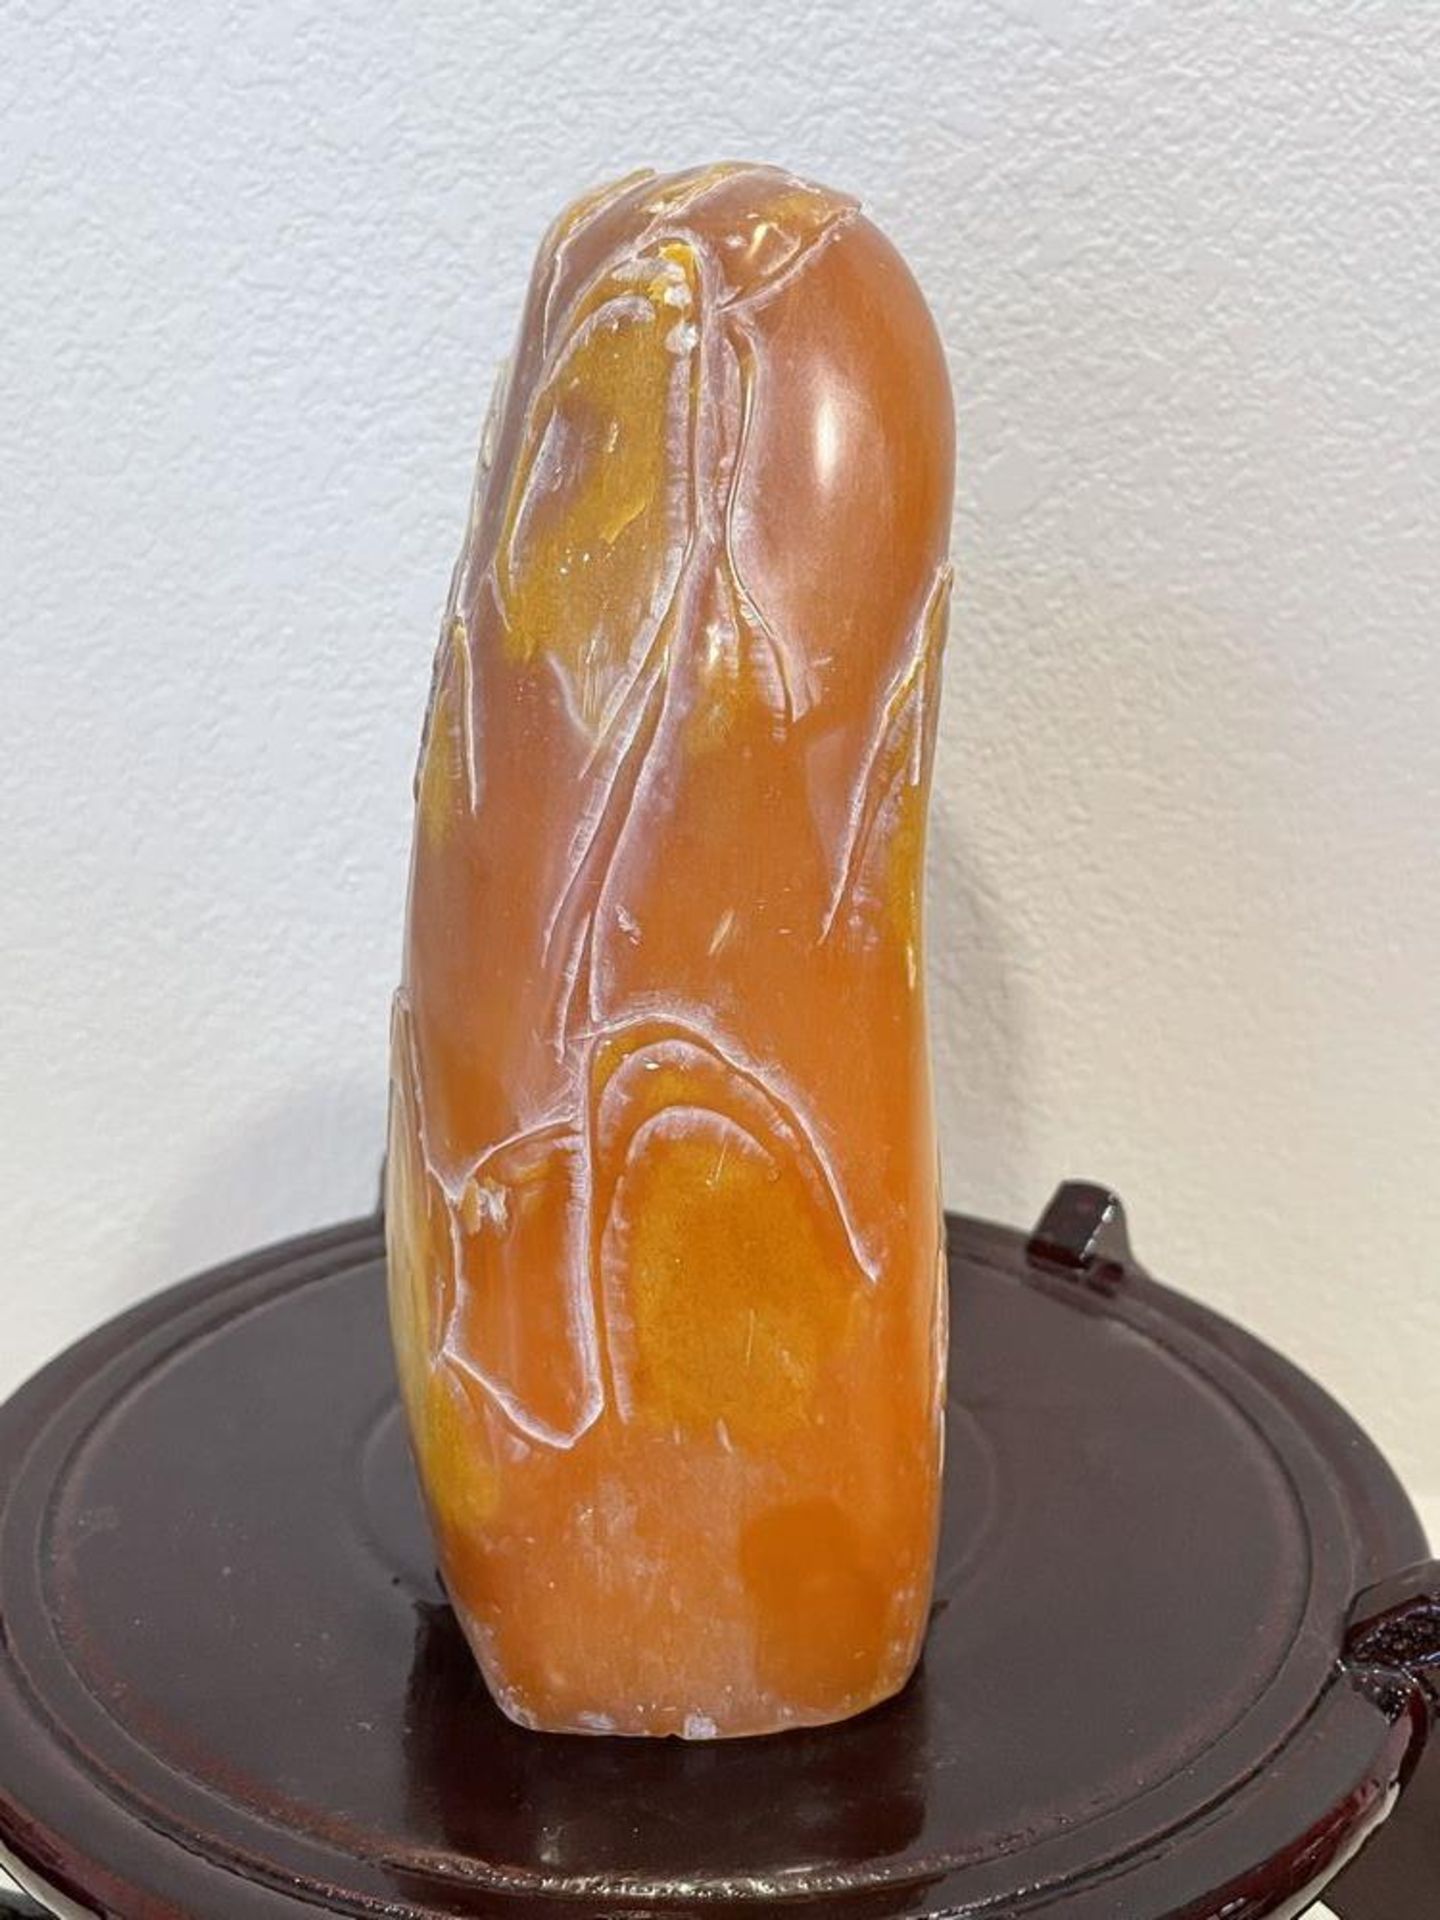 Orange/Amber Color East Asian Stone Sculpture on wood stand, Heavy/Cold Stone - Image 5 of 7